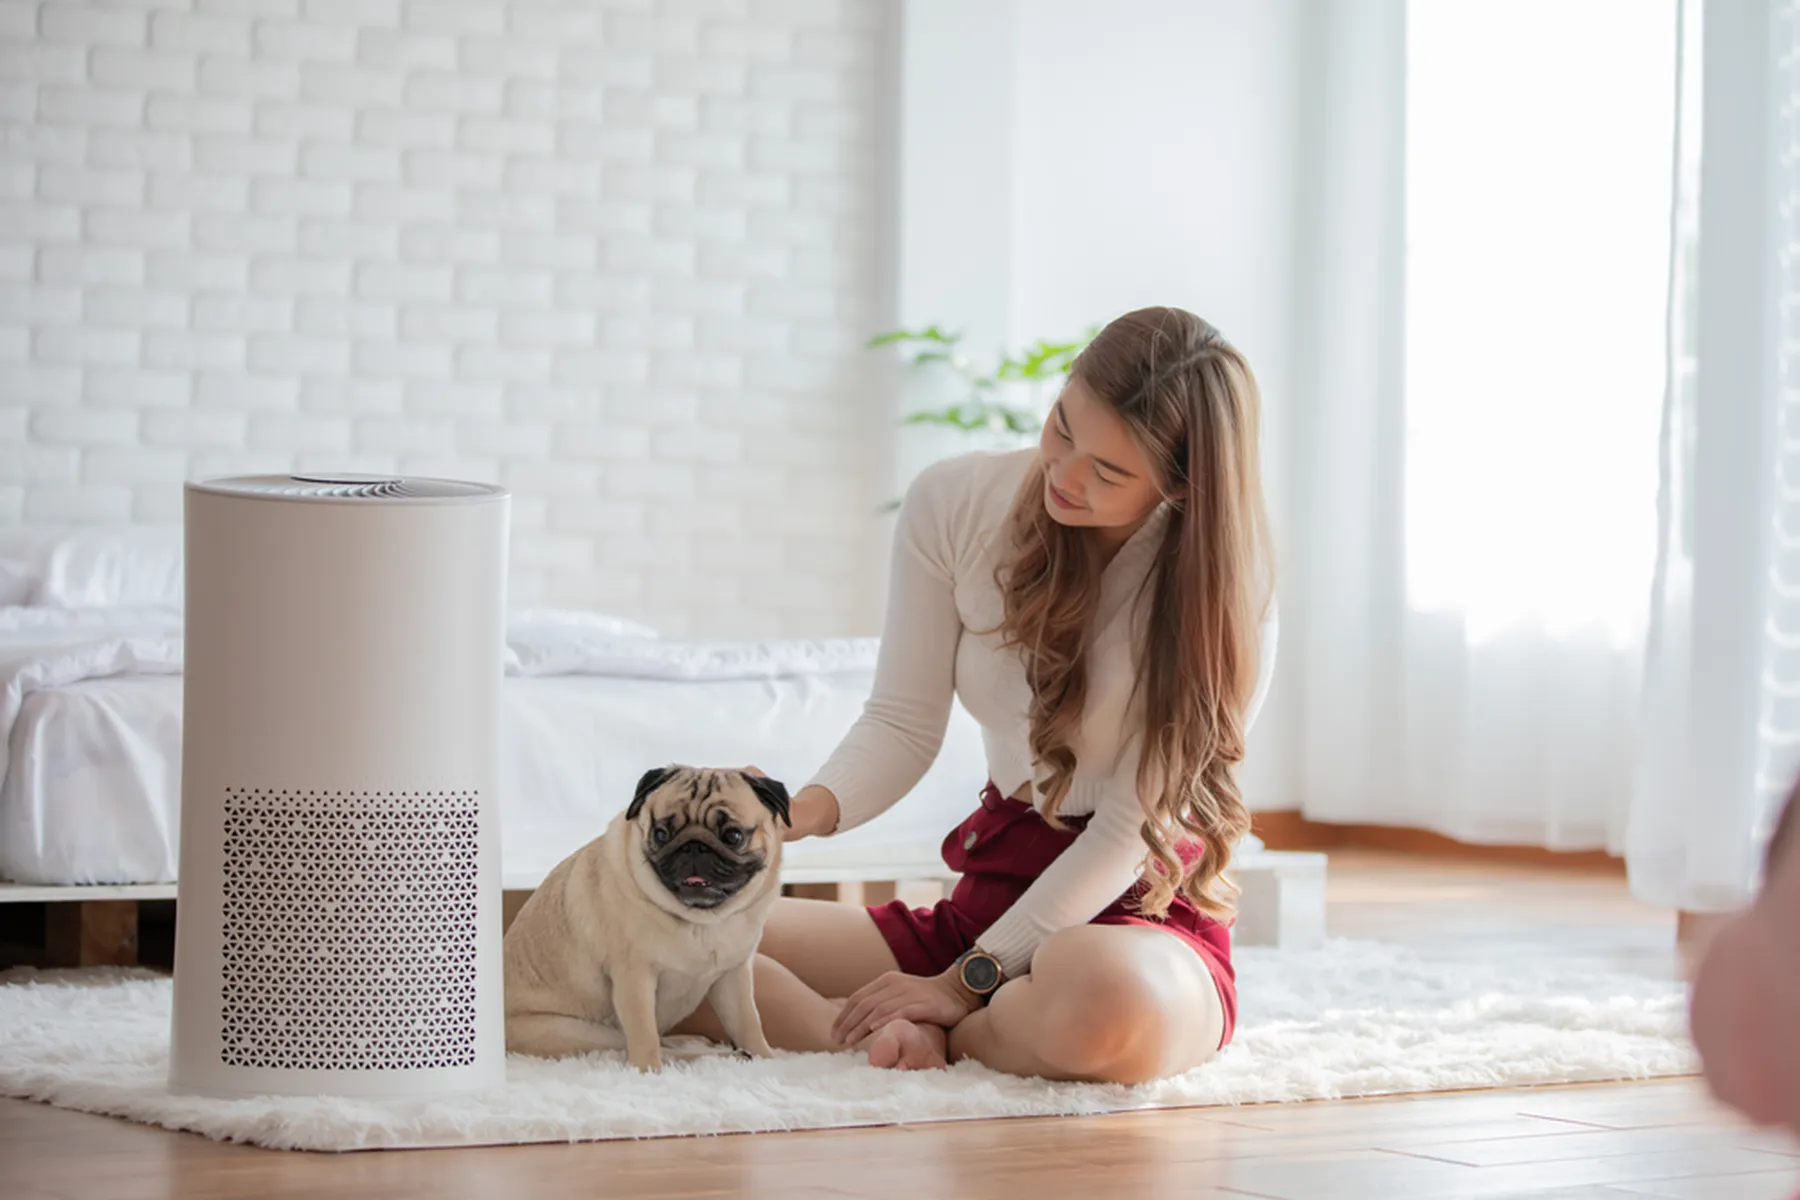 Woman with a long sleeve shirt on is petting her dog and sitting next to an air purifier.